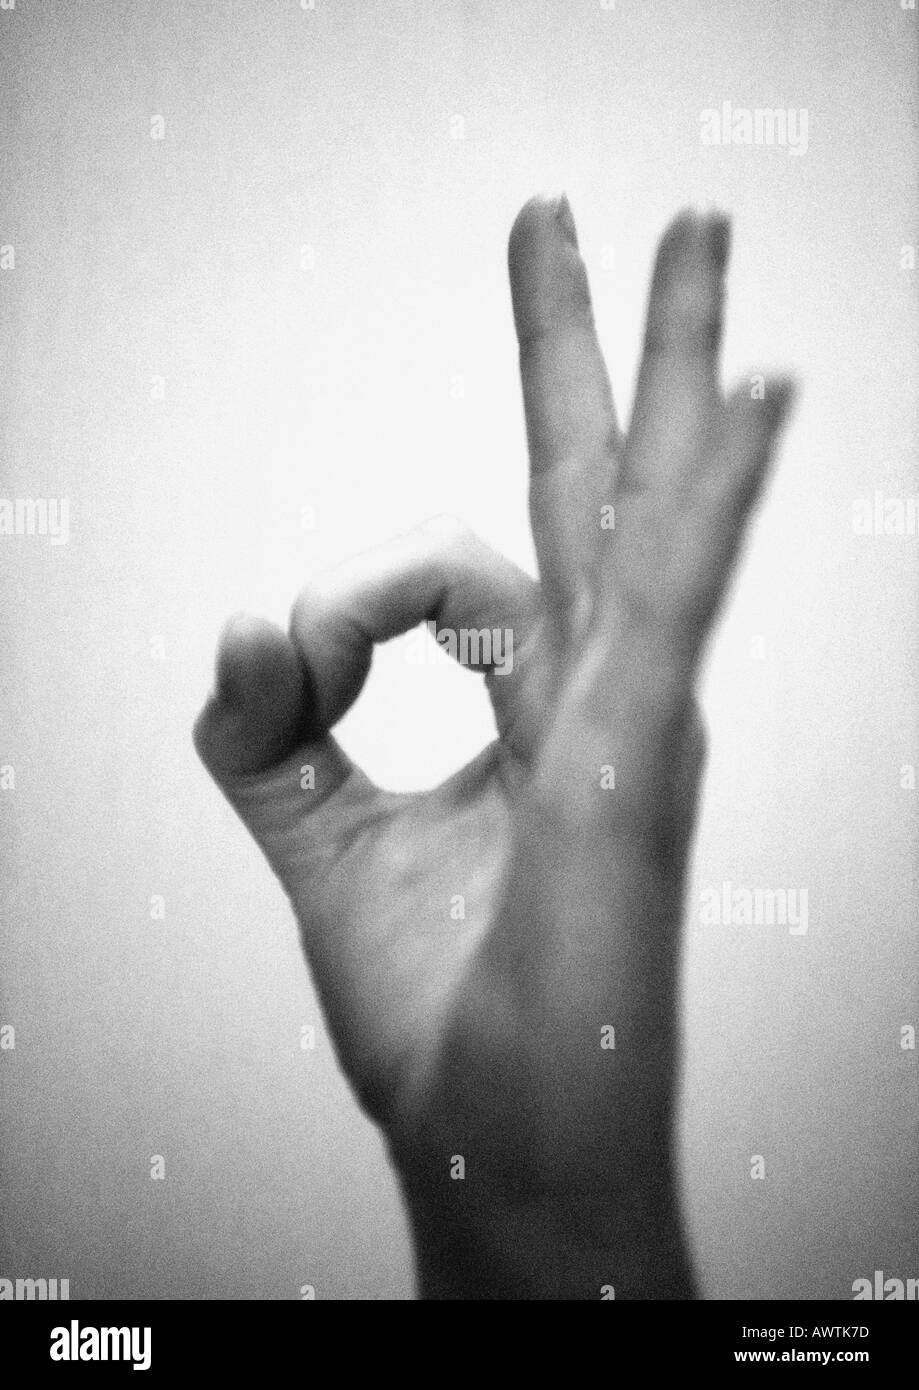 Hand forming ok sign, close-up, b&w Stock Photo